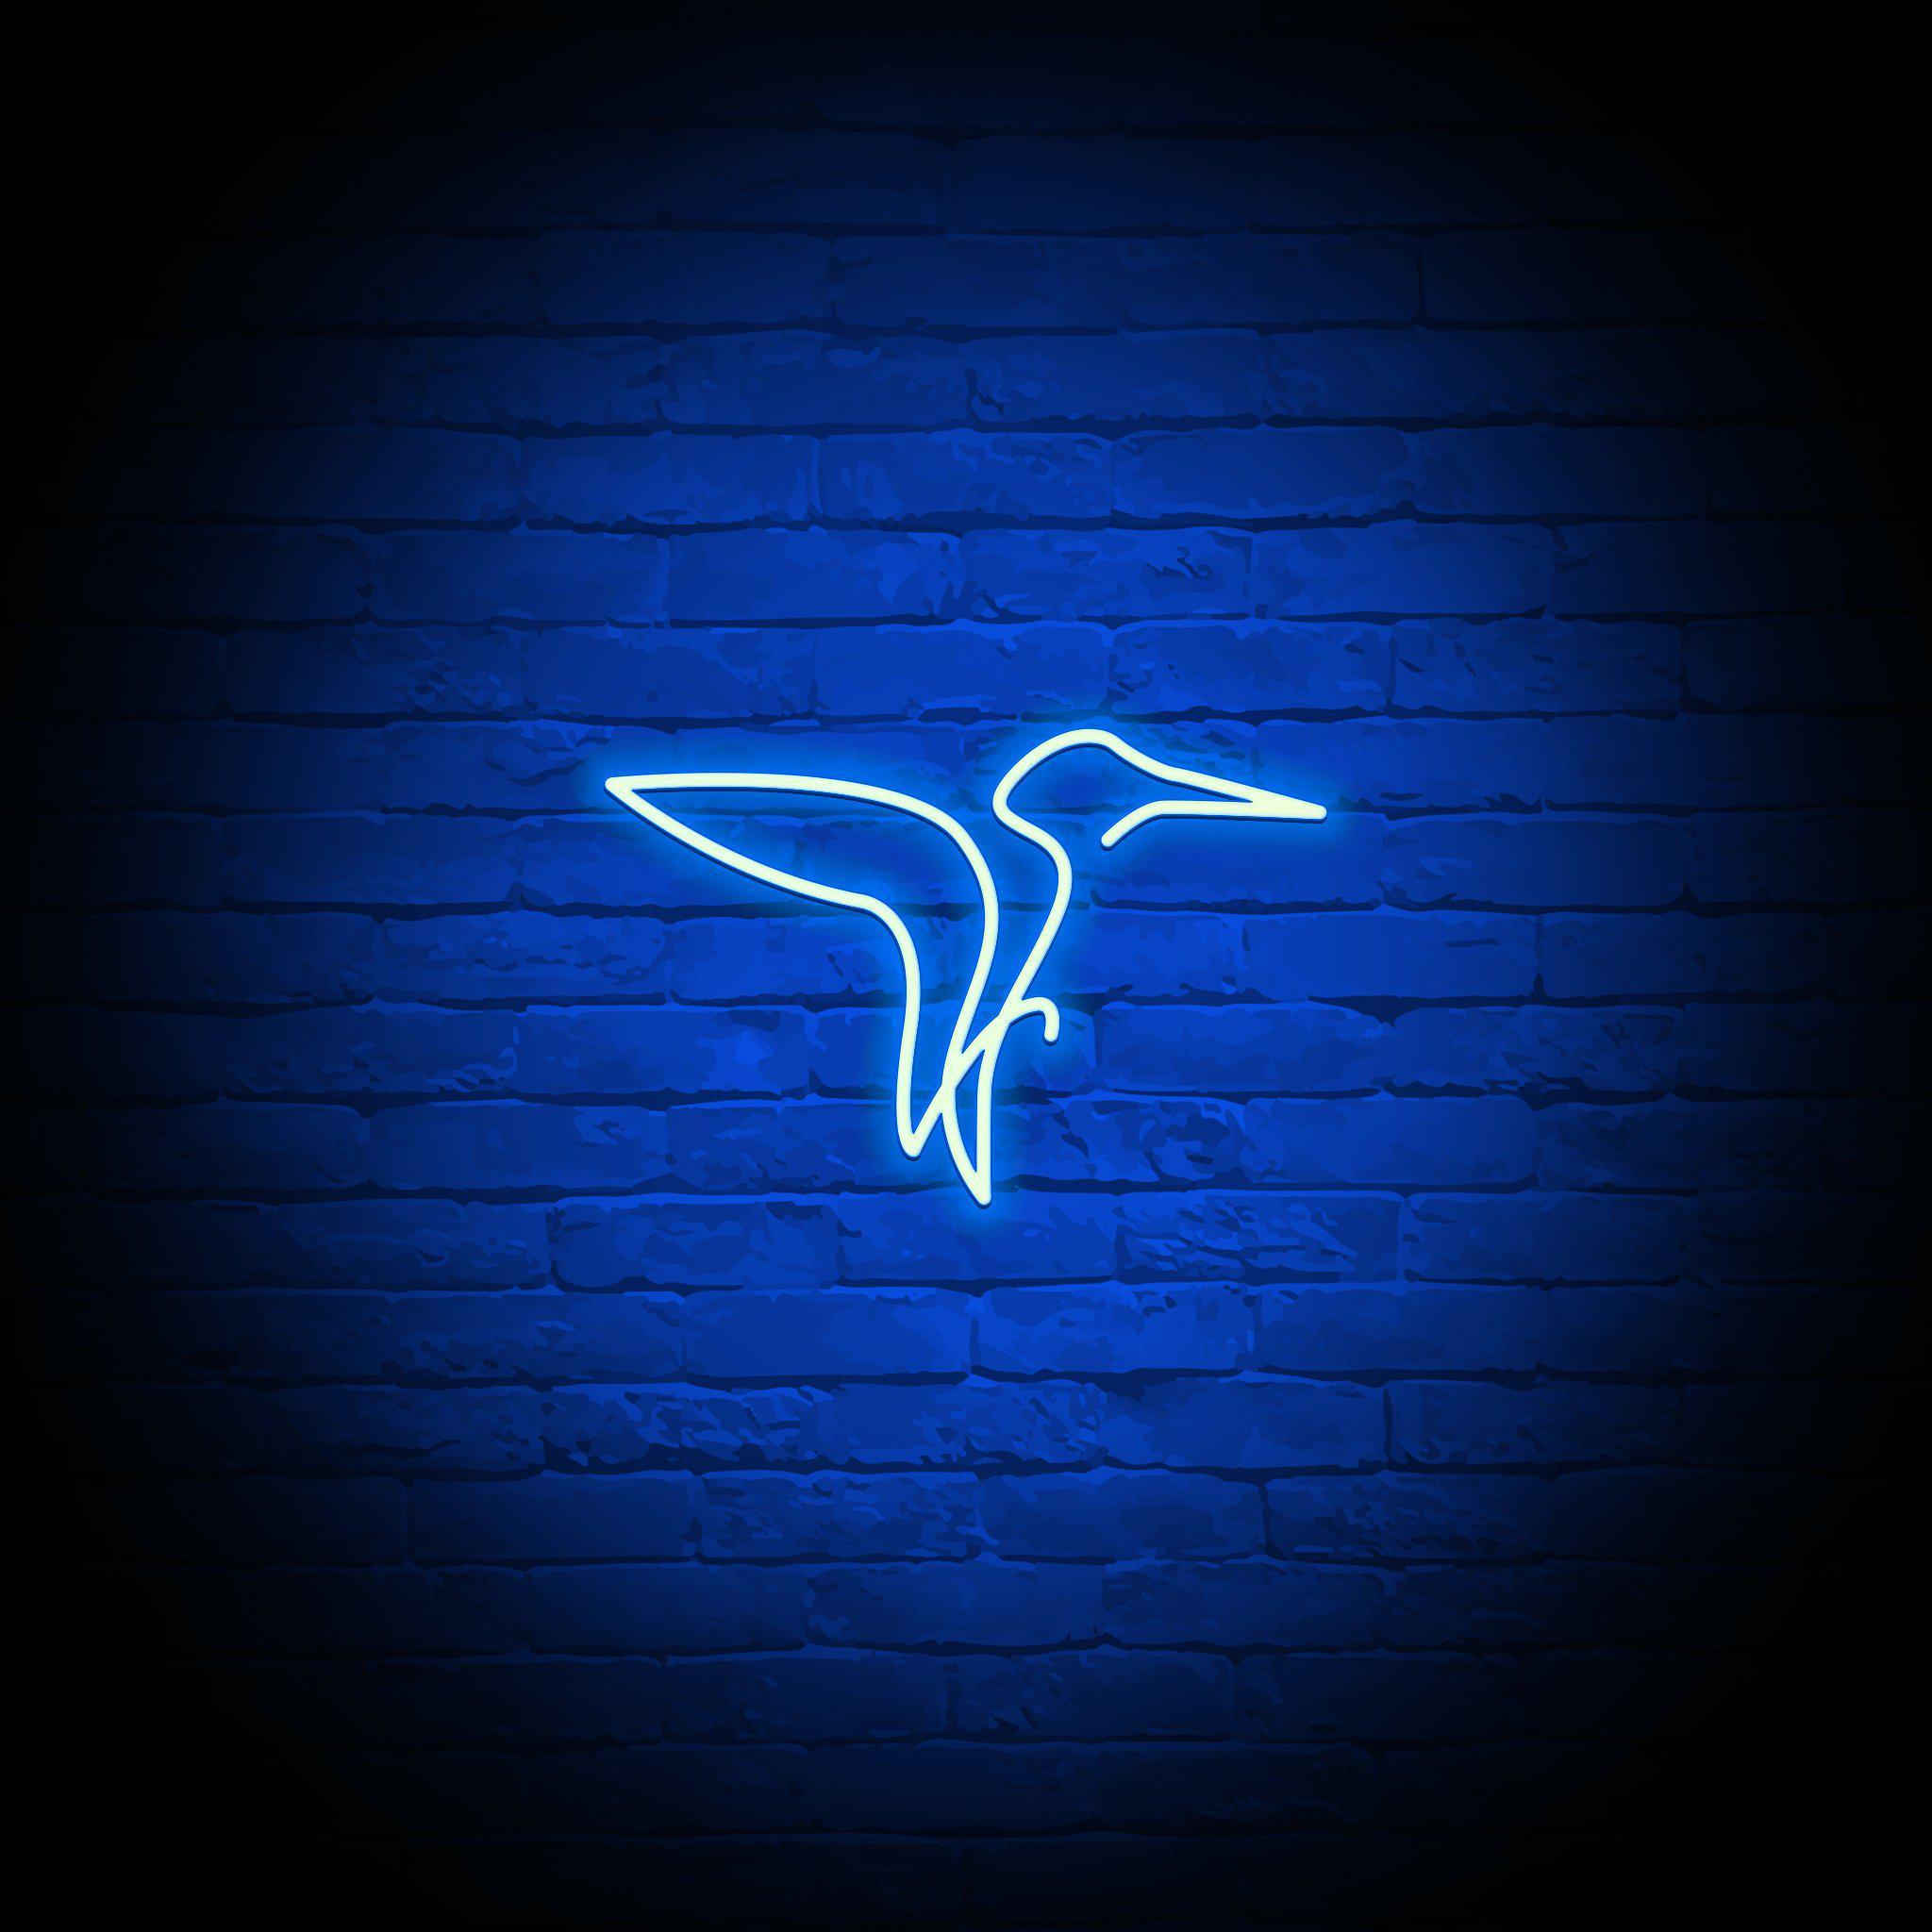 'KINGFISHER' NEON SIGN - NeonFerry